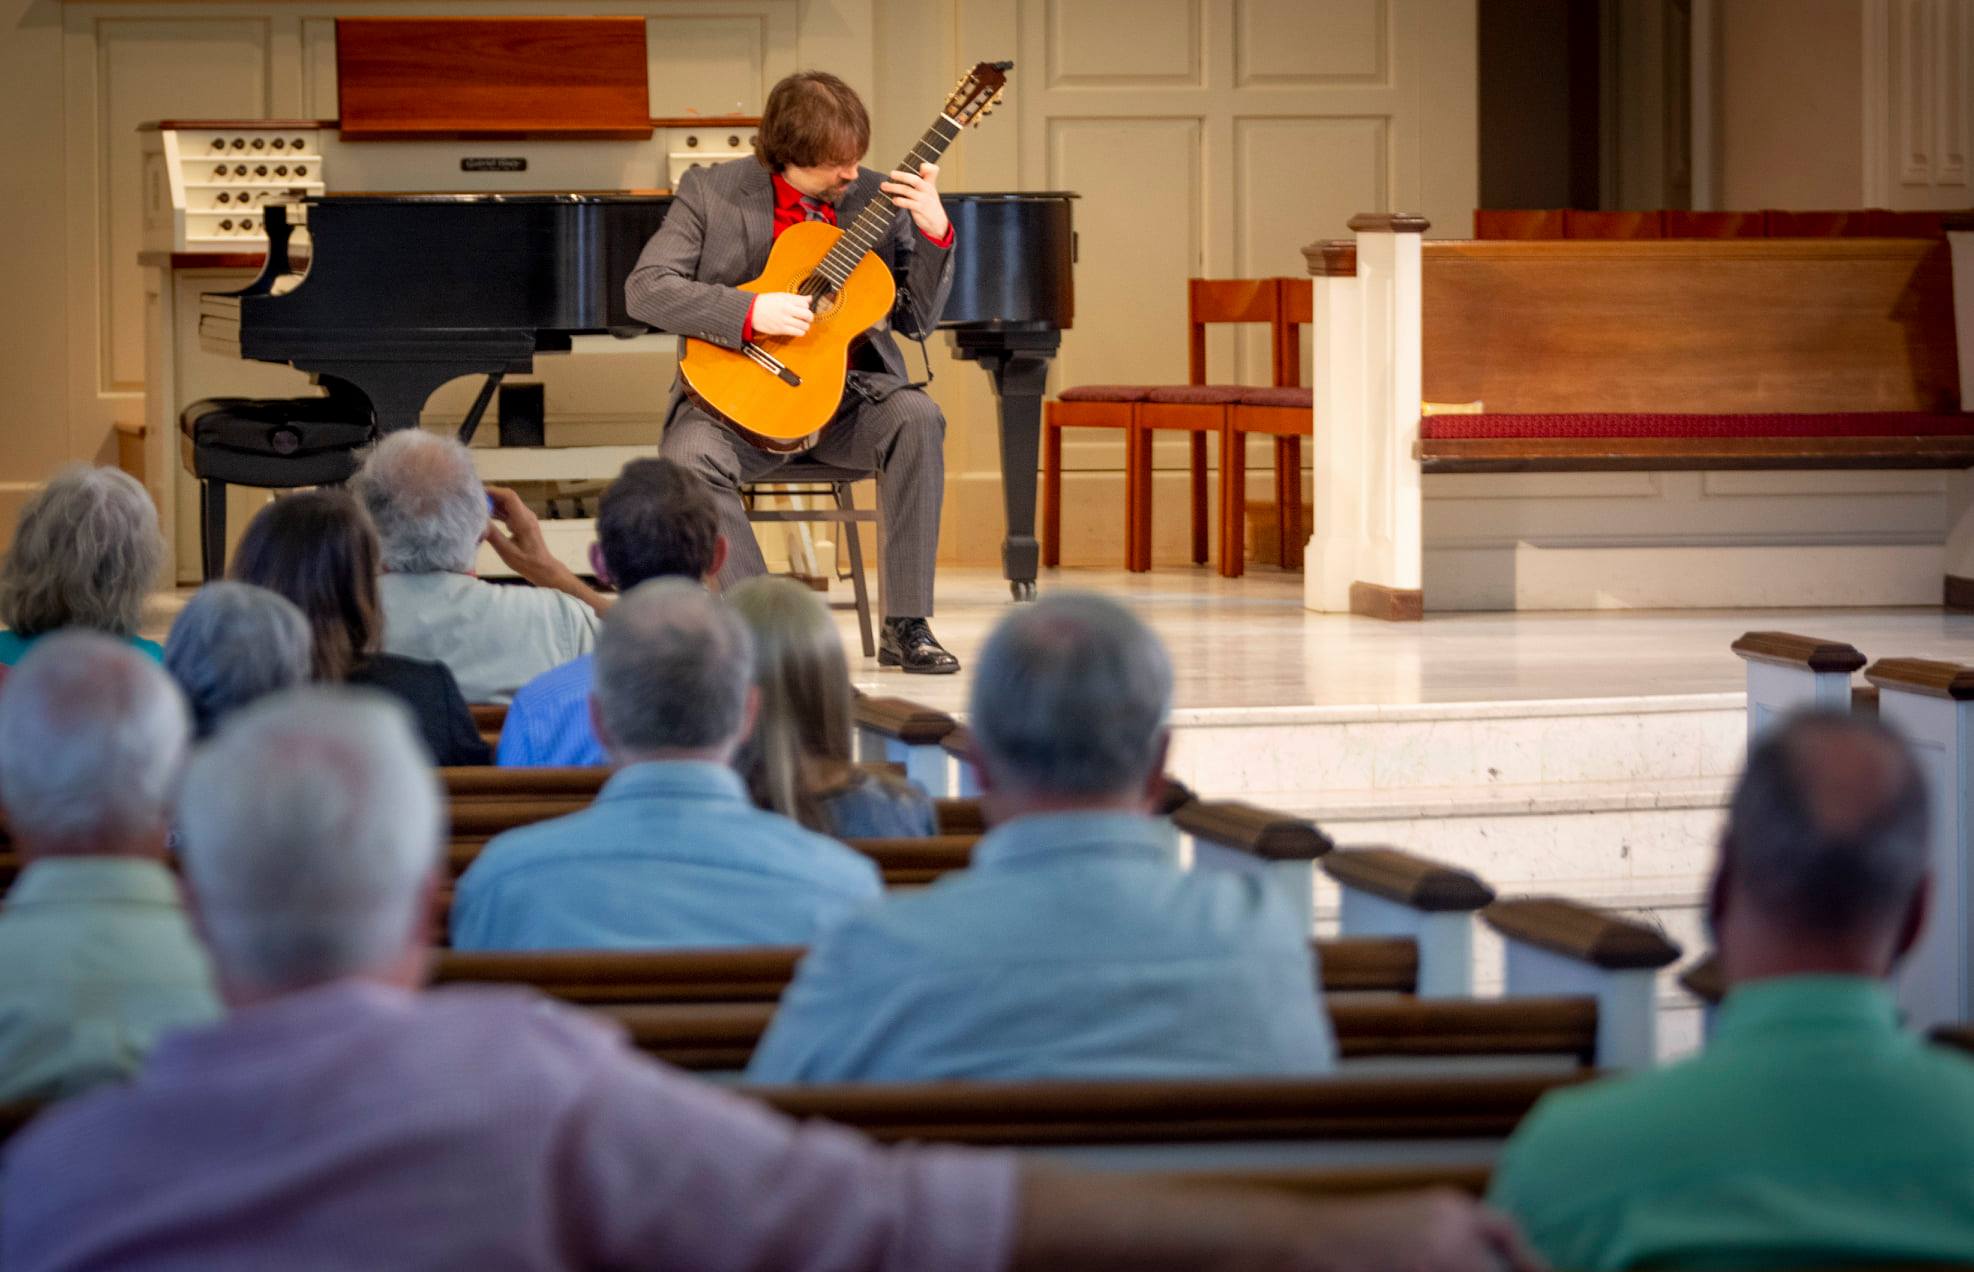 Brad Rau performing at Market street concert series.  Brad Rau is a classical guitarist from chester county PA 